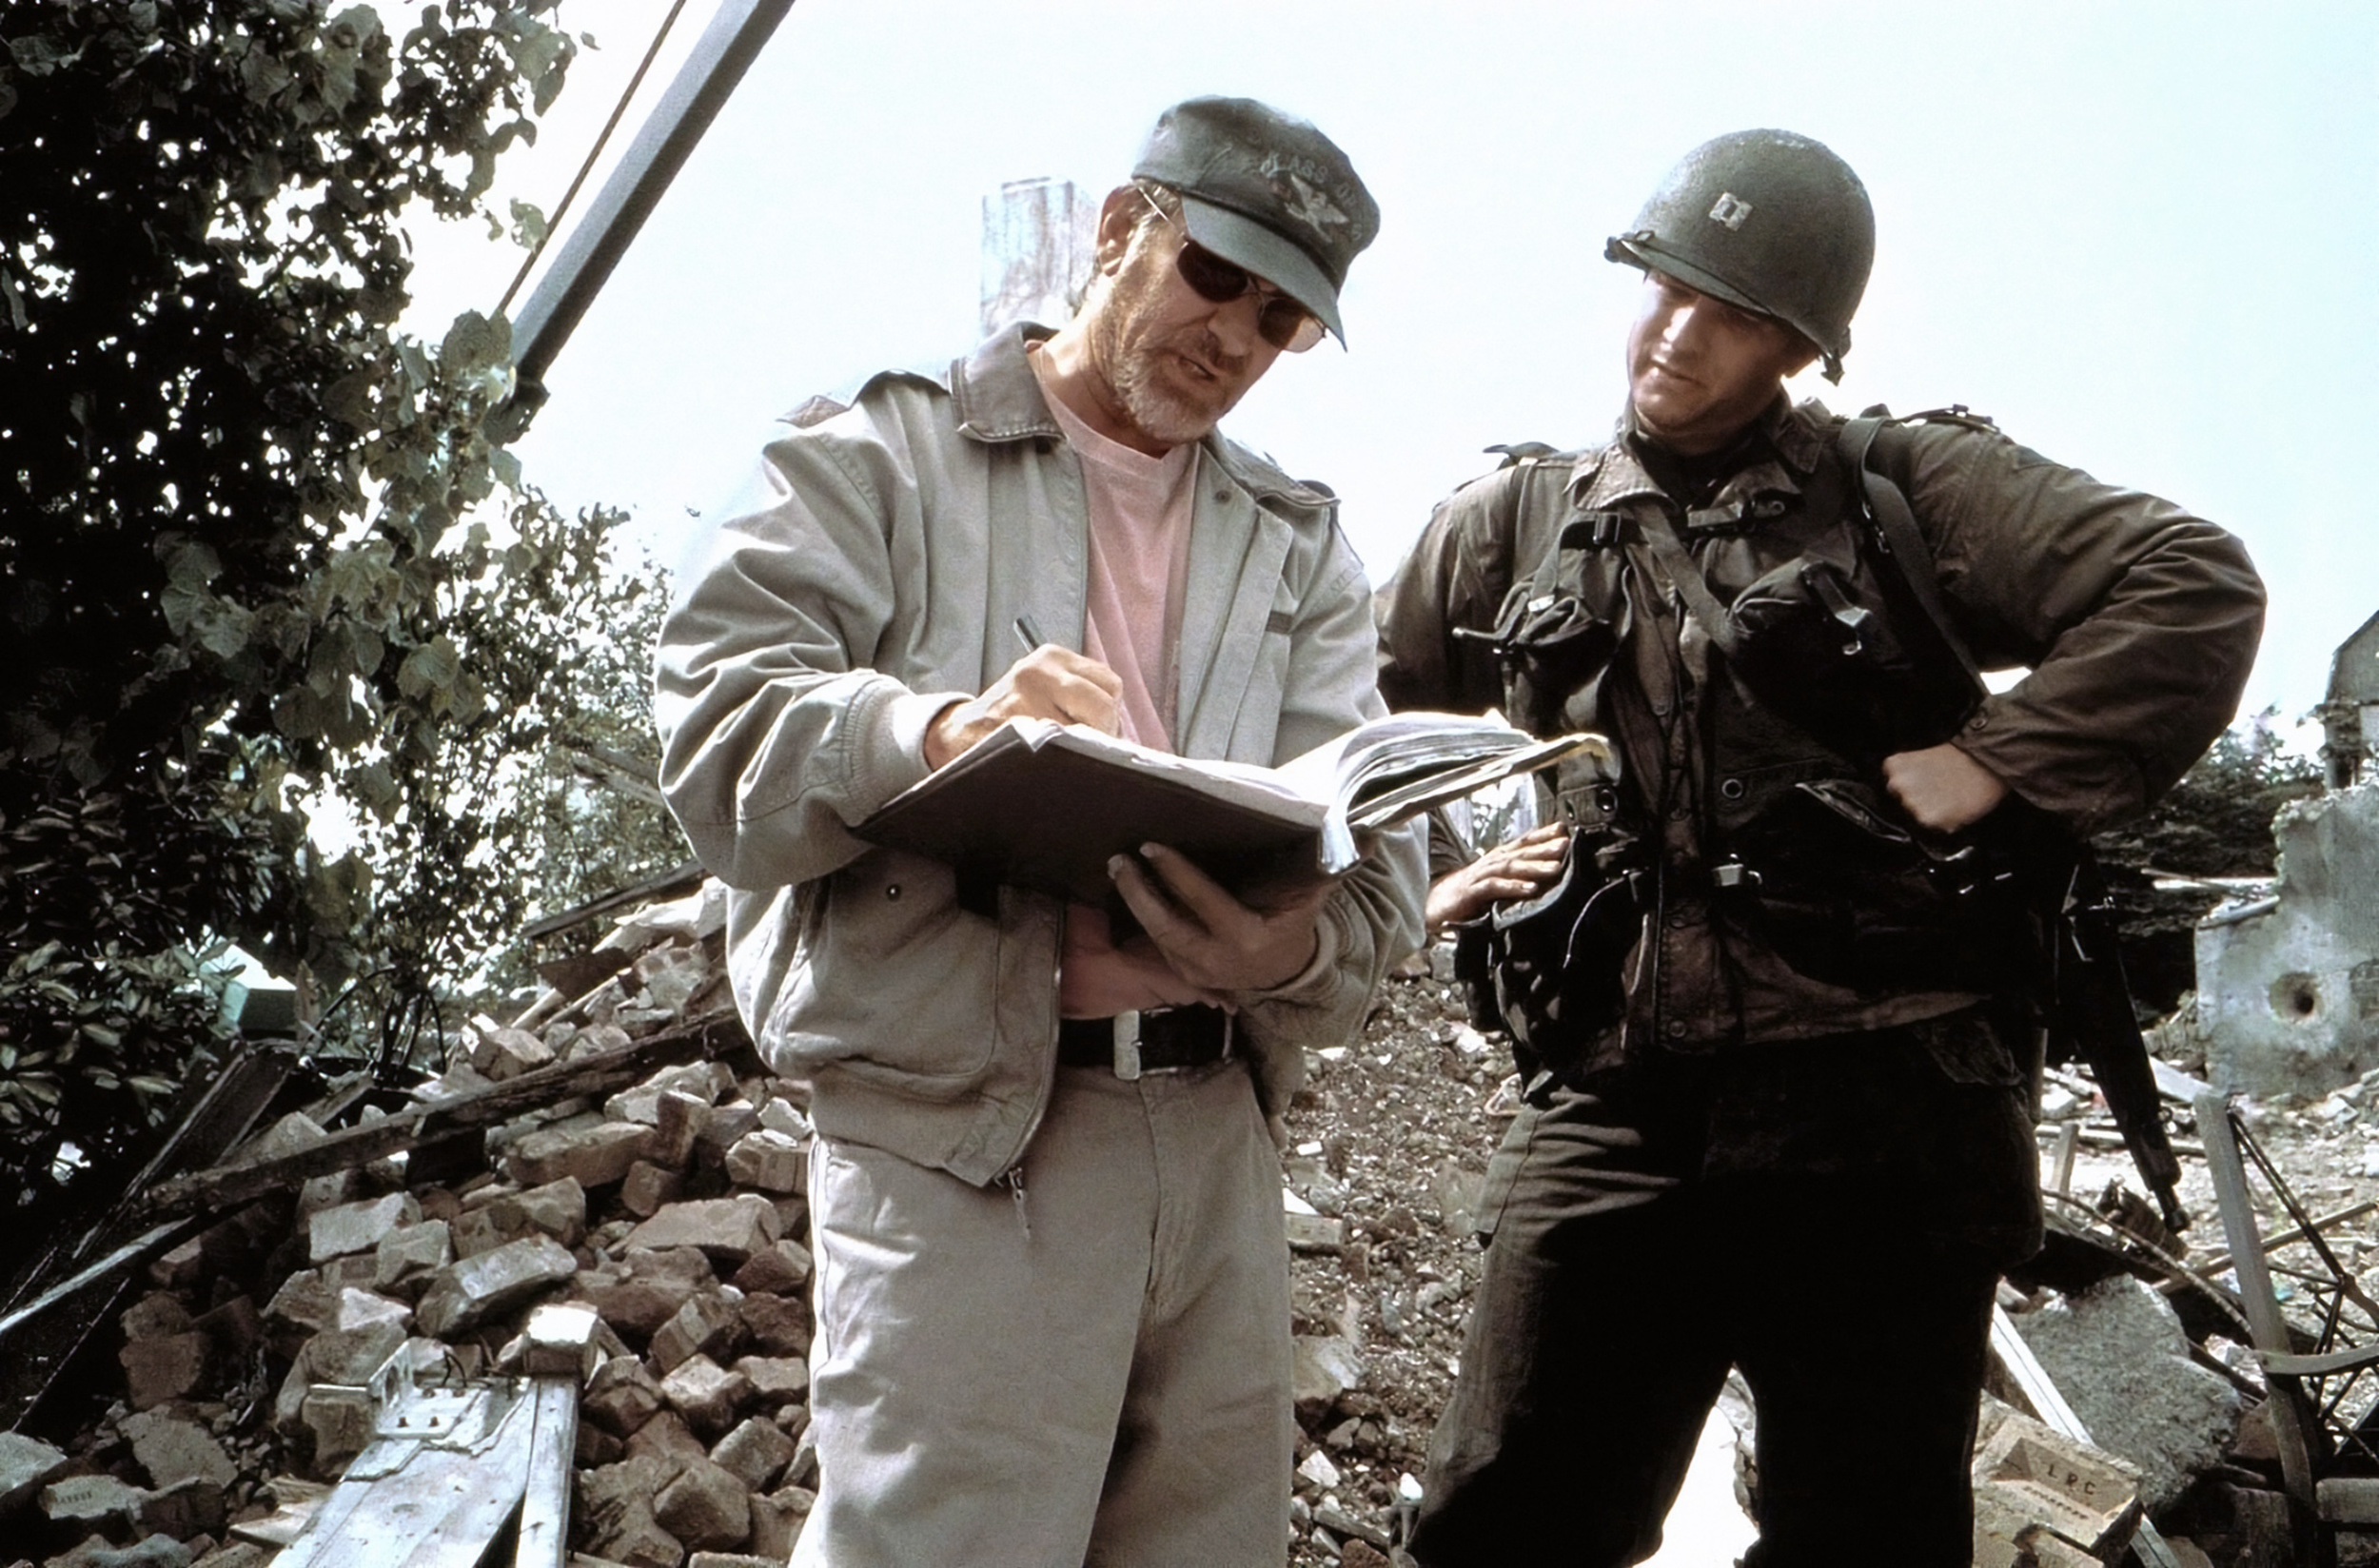 <p>Prior to making <em>Saving Private Ryan</em>, Spielberg had already directed <em>1941</em>, <em>Empire of the Sun</em>, and <em>Schindler’s List</em>. Heck, even two of the Indiana Jones movies have World War II connections. Clearly, Spielberg had an interest in the subject.</p><p>You may also like: <a href='https://www.yardbarker.com/entertainment/articles/20_movies_you_might_not_know_that_were_adapted_from_books/s1__38836882'>20 movies you might not know that were adapted from books</a></p>